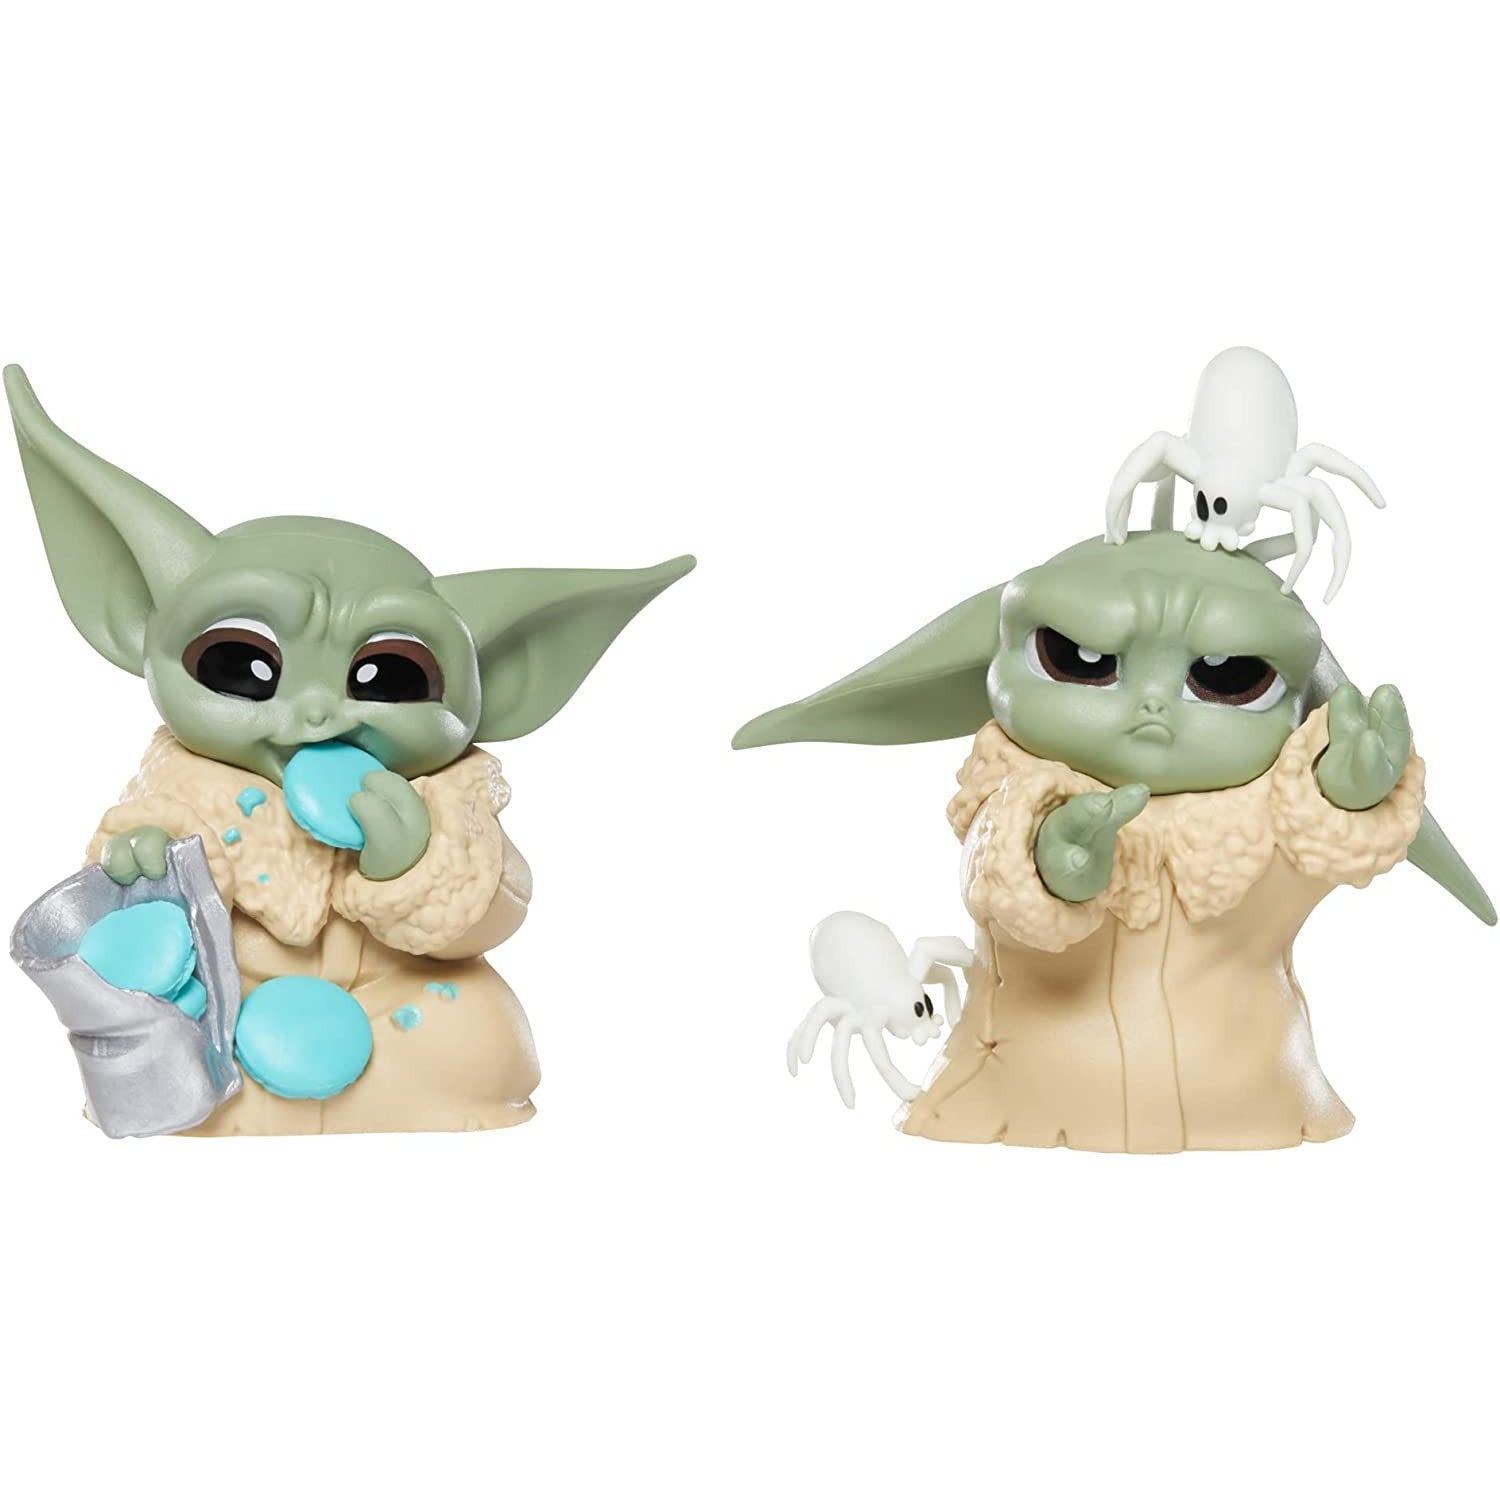 Two figurines of Grogu in “Pesky Spider” and “Cookie Eating” poses.